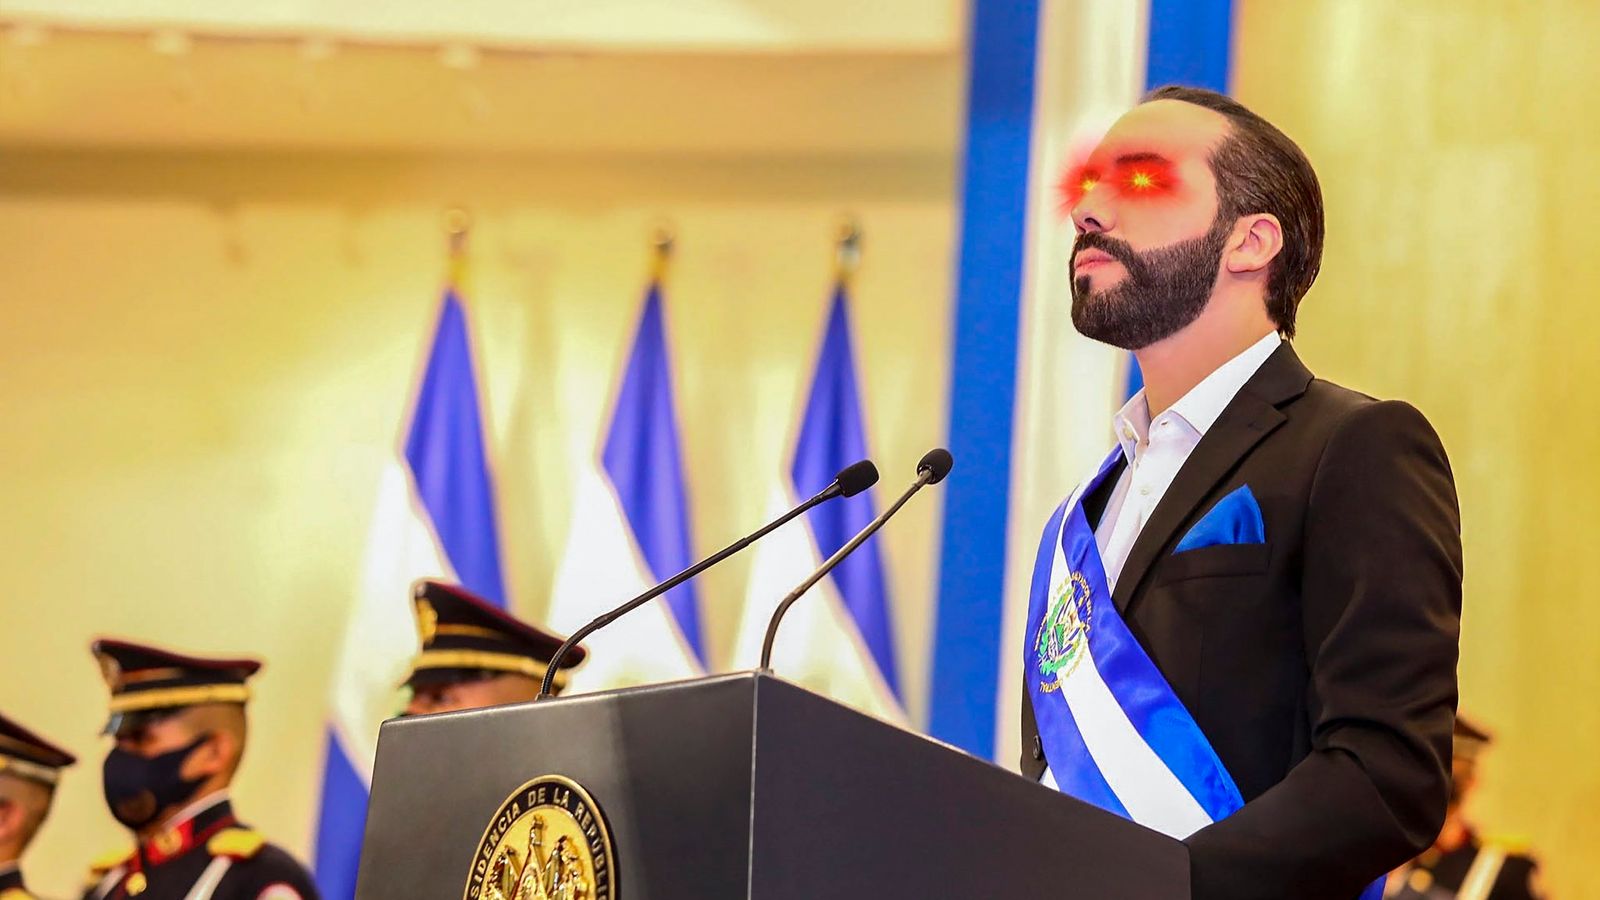 El Salvador could become first country to use Bitcoin as legal tender under president’s plans